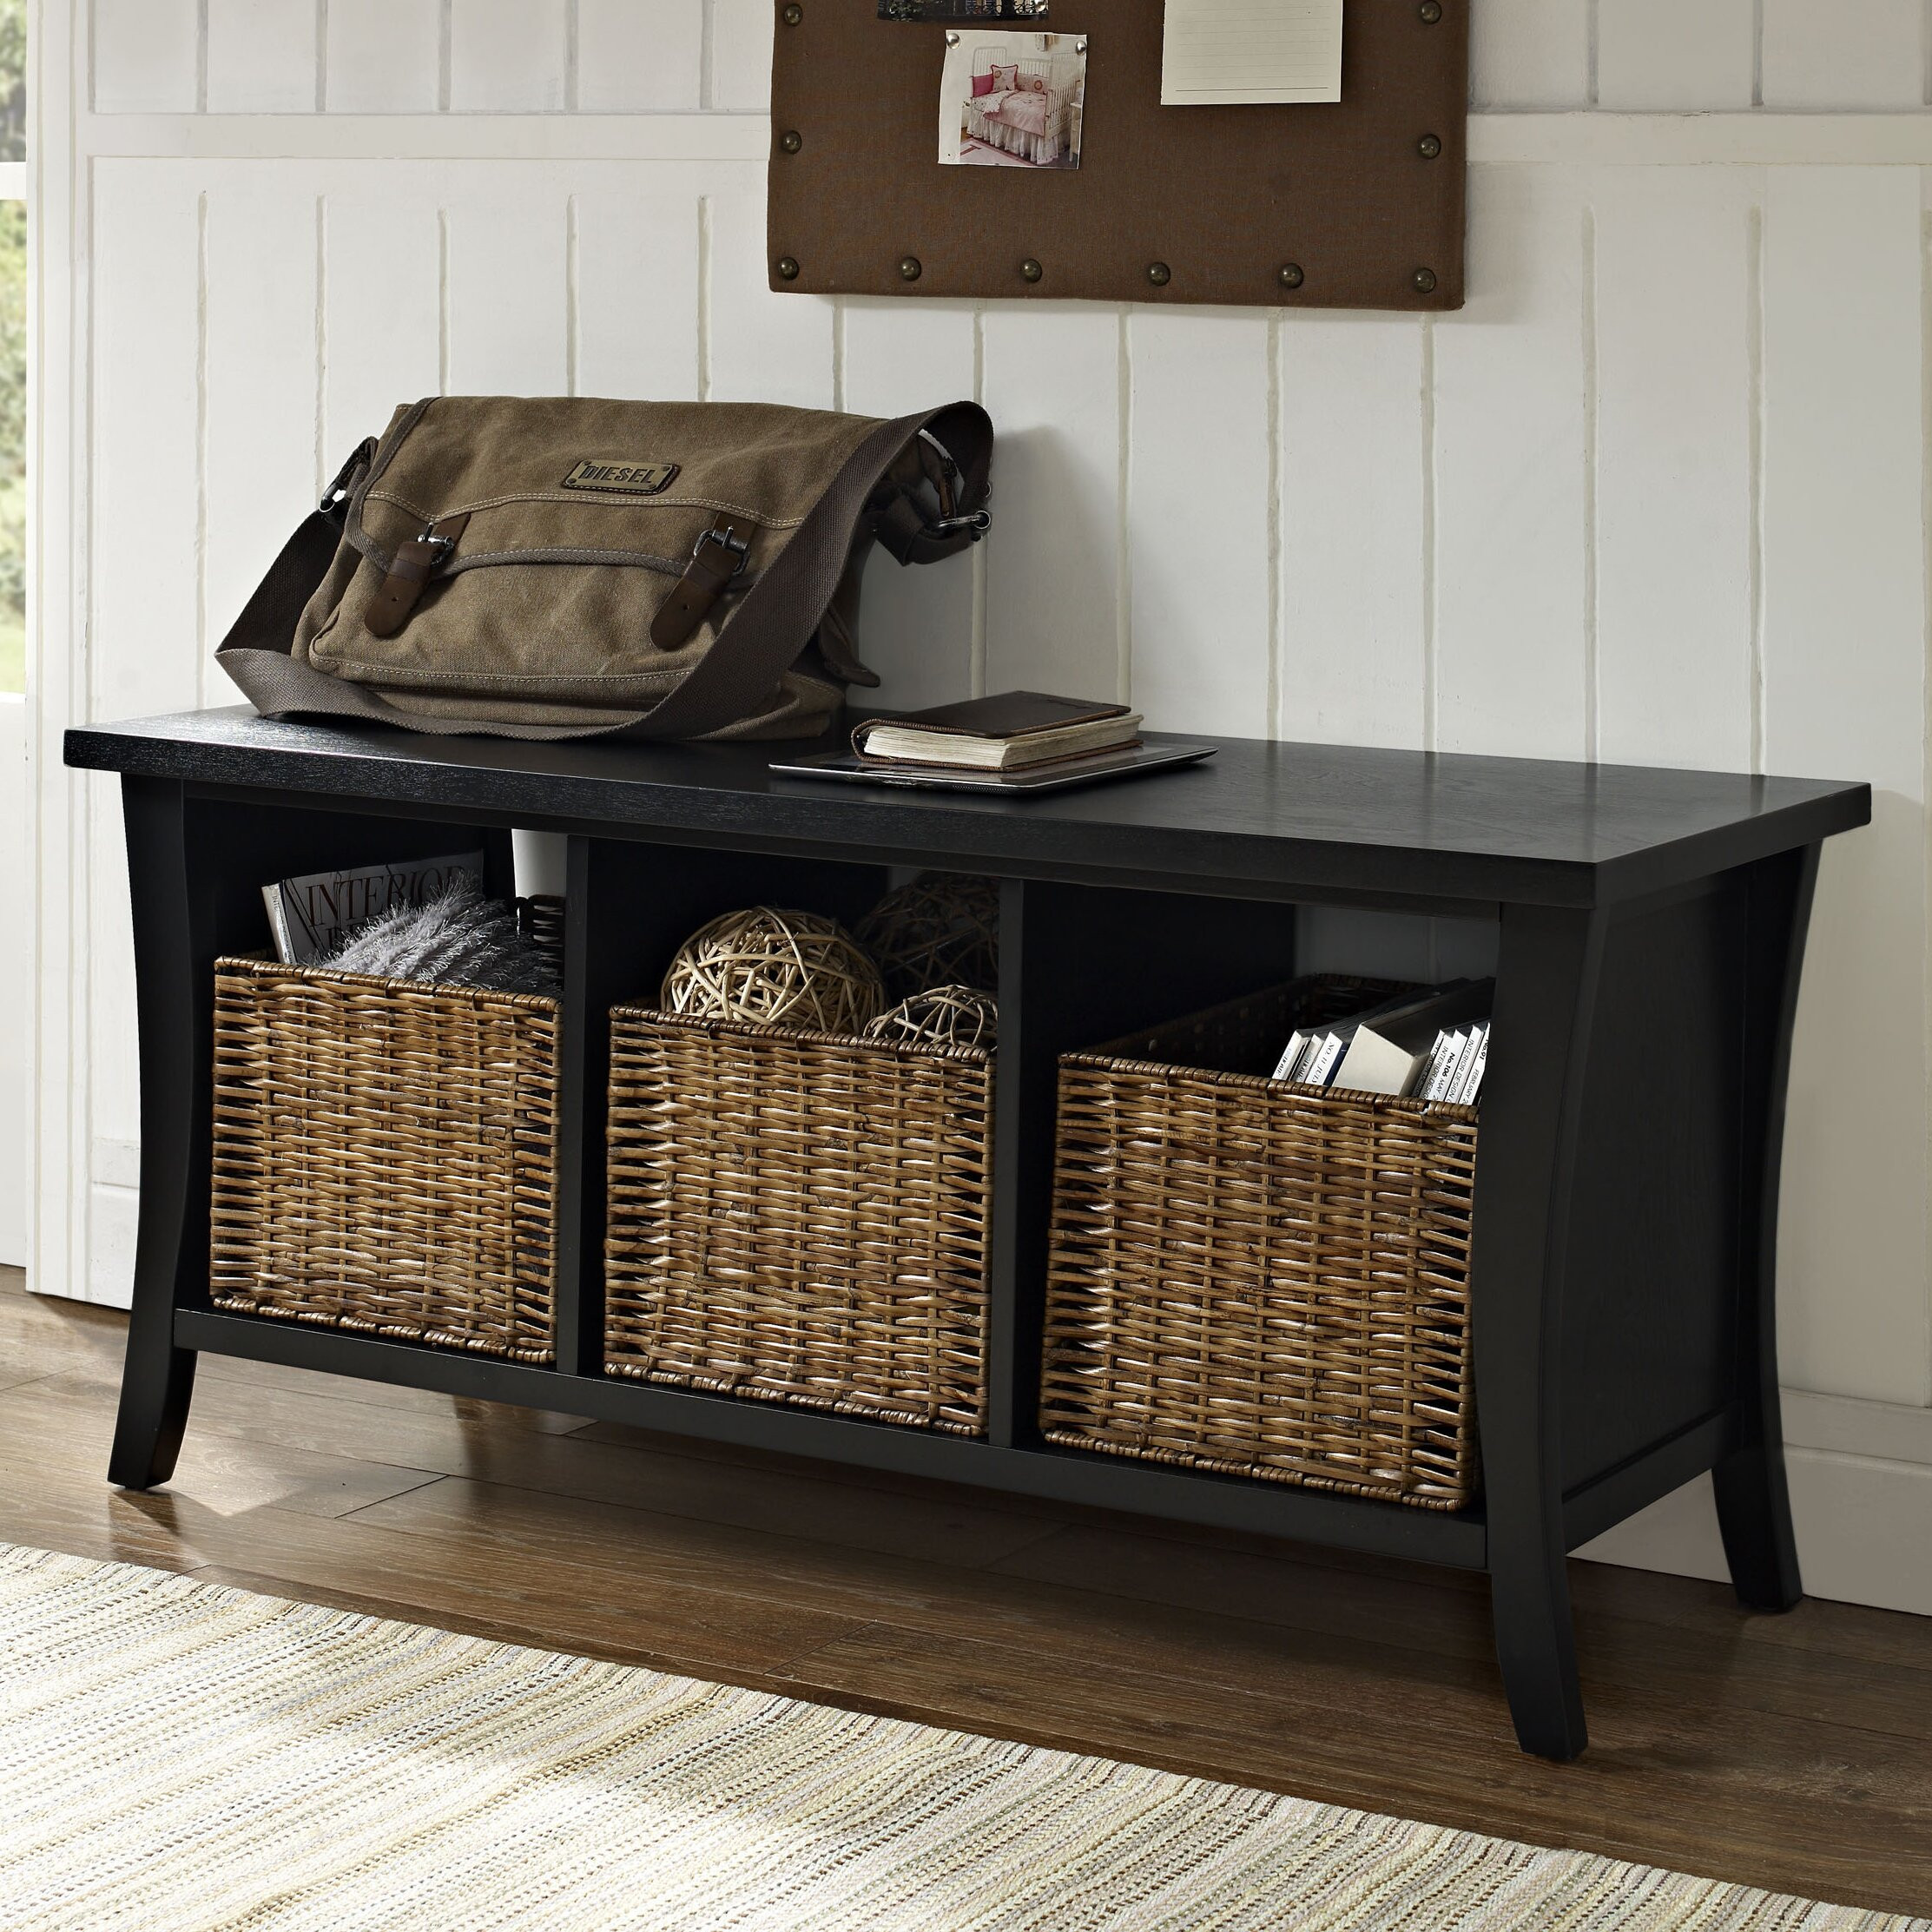 Bench For Entryway With Storage
 Beachcrest Home Lewisetta Entryway Storage Bench & Reviews